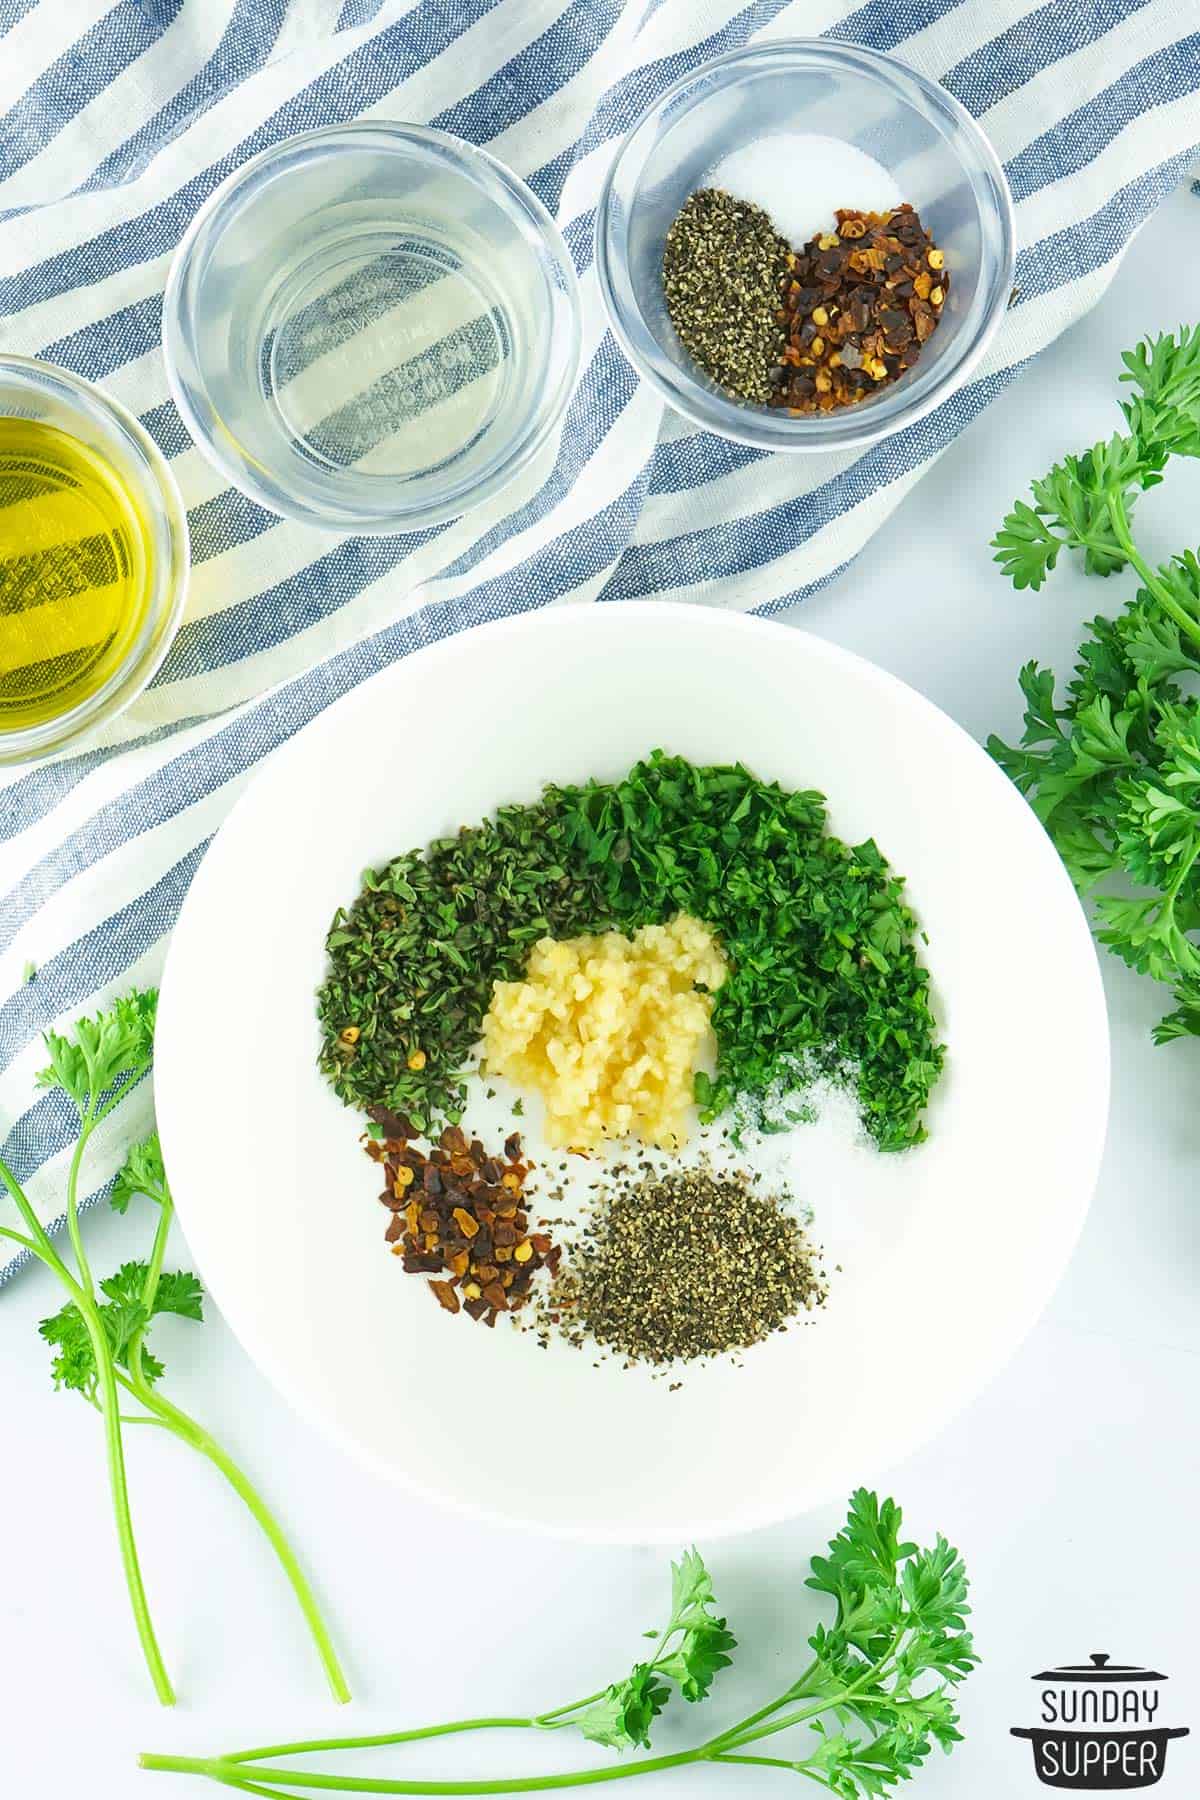 chimichurri ingredients added to a bowl to mix